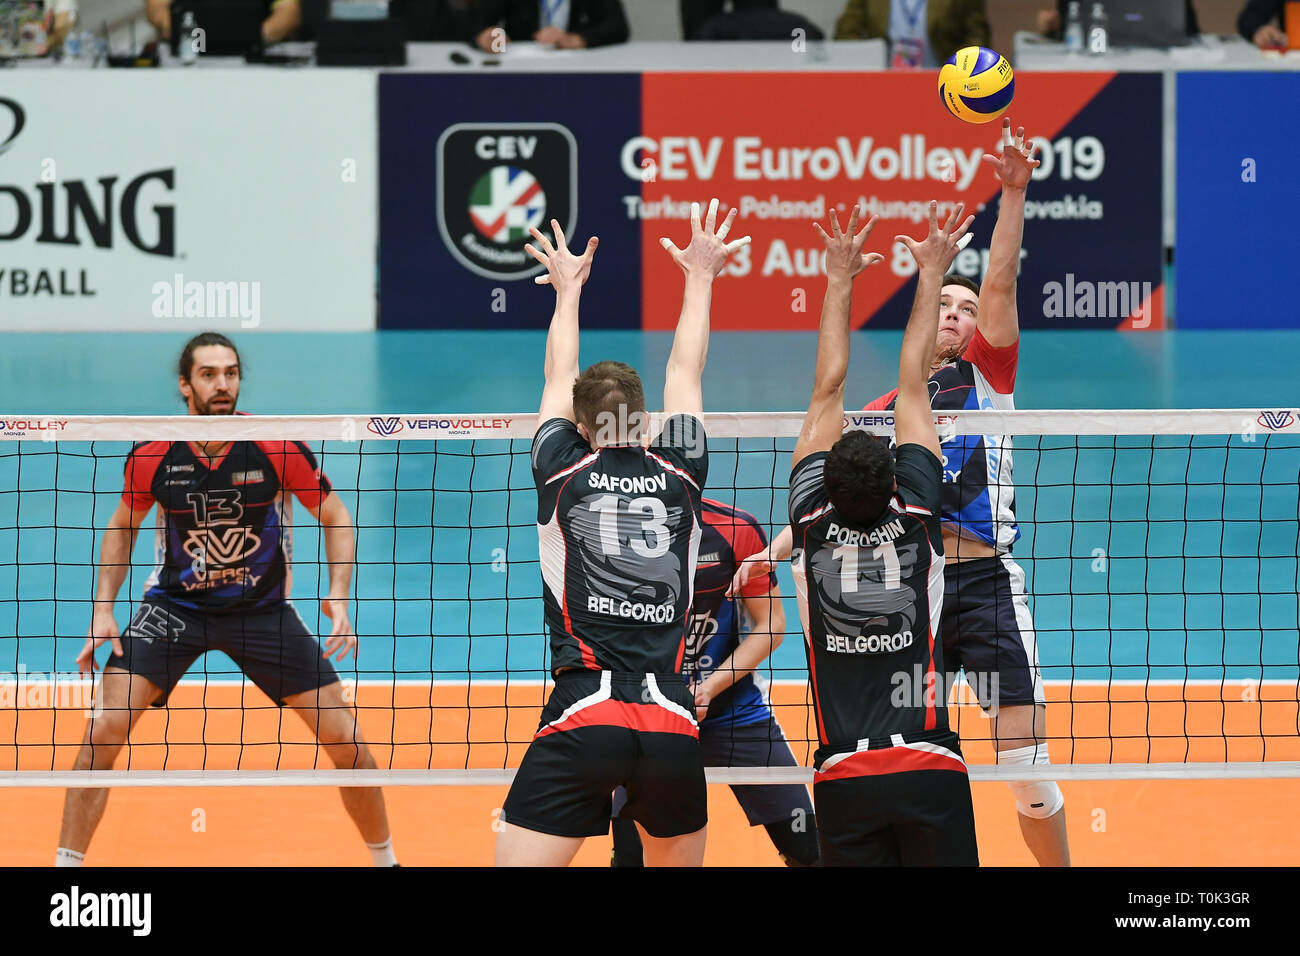 Candy Arena, Monza, Italy. 20th March, 2019. CEV Volleyball Challenge Cup  men, Final, 1st leg. Oleh Plotnytskyi of Vero Volley Monza during the match  between Vero Volley Monza and Belogorie Belgorod at